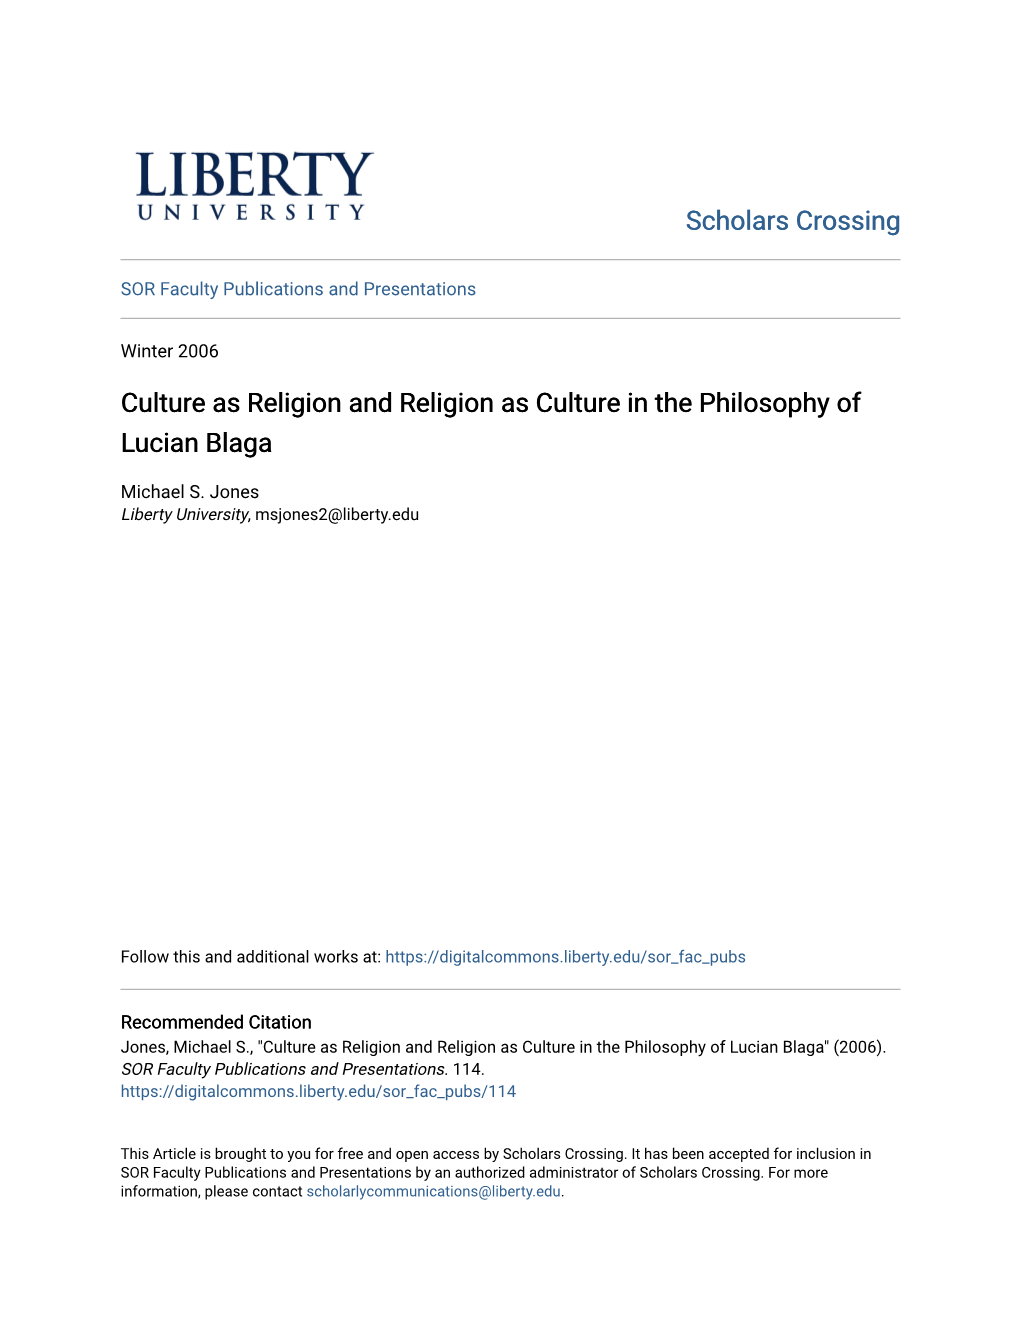 Culture As Religion and Religion As Culture in the Philosophy of Lucian Blaga